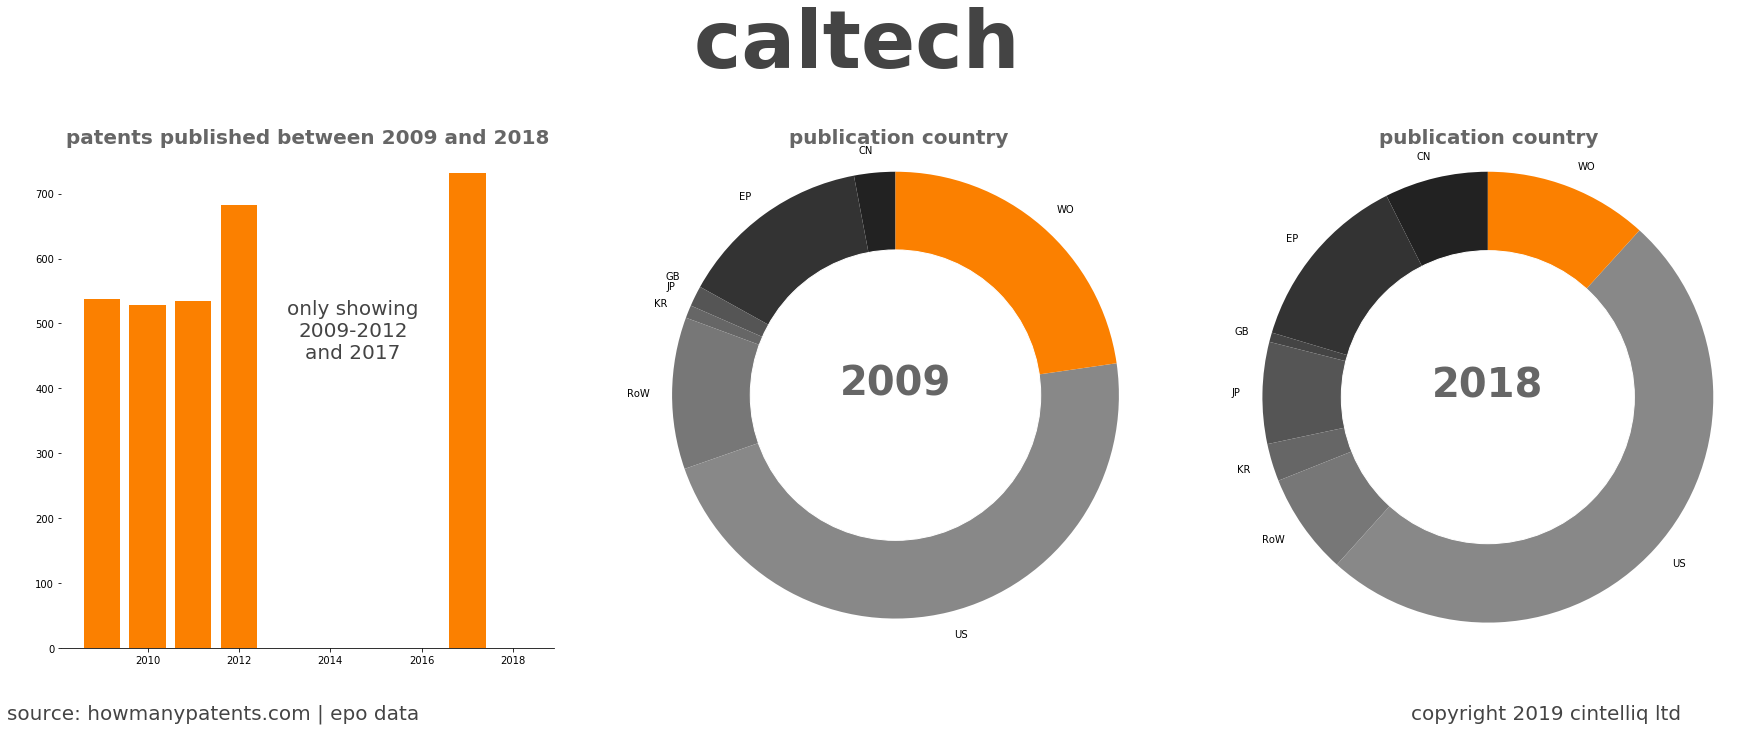 summary of patents for Caltech 